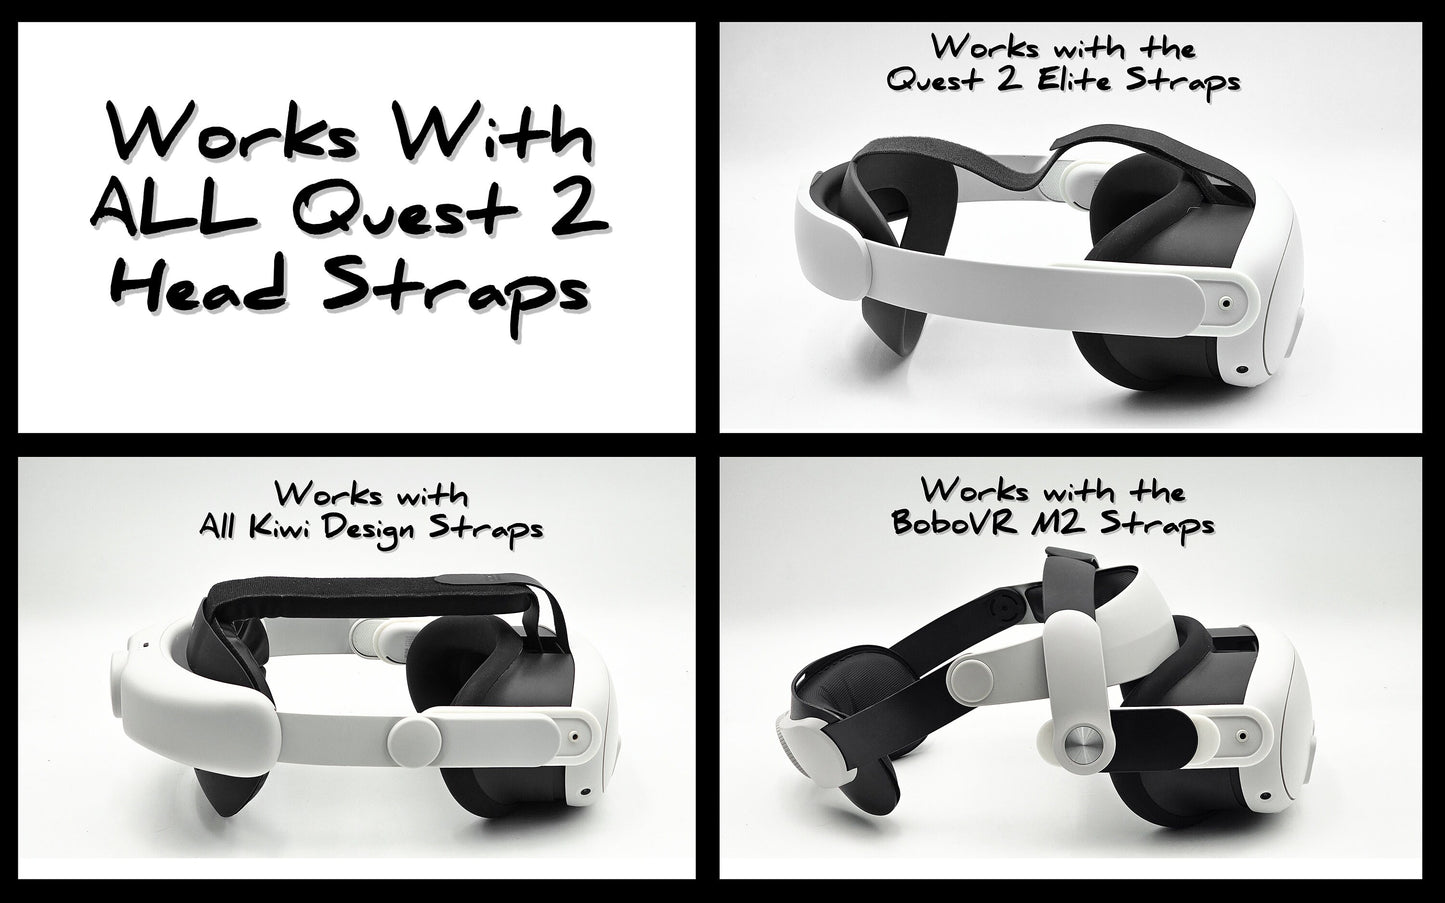 Meta Quest 3 Universal Head Strap Adapters - Use ANY Quest 2 Head Strap On Your Quest 3!